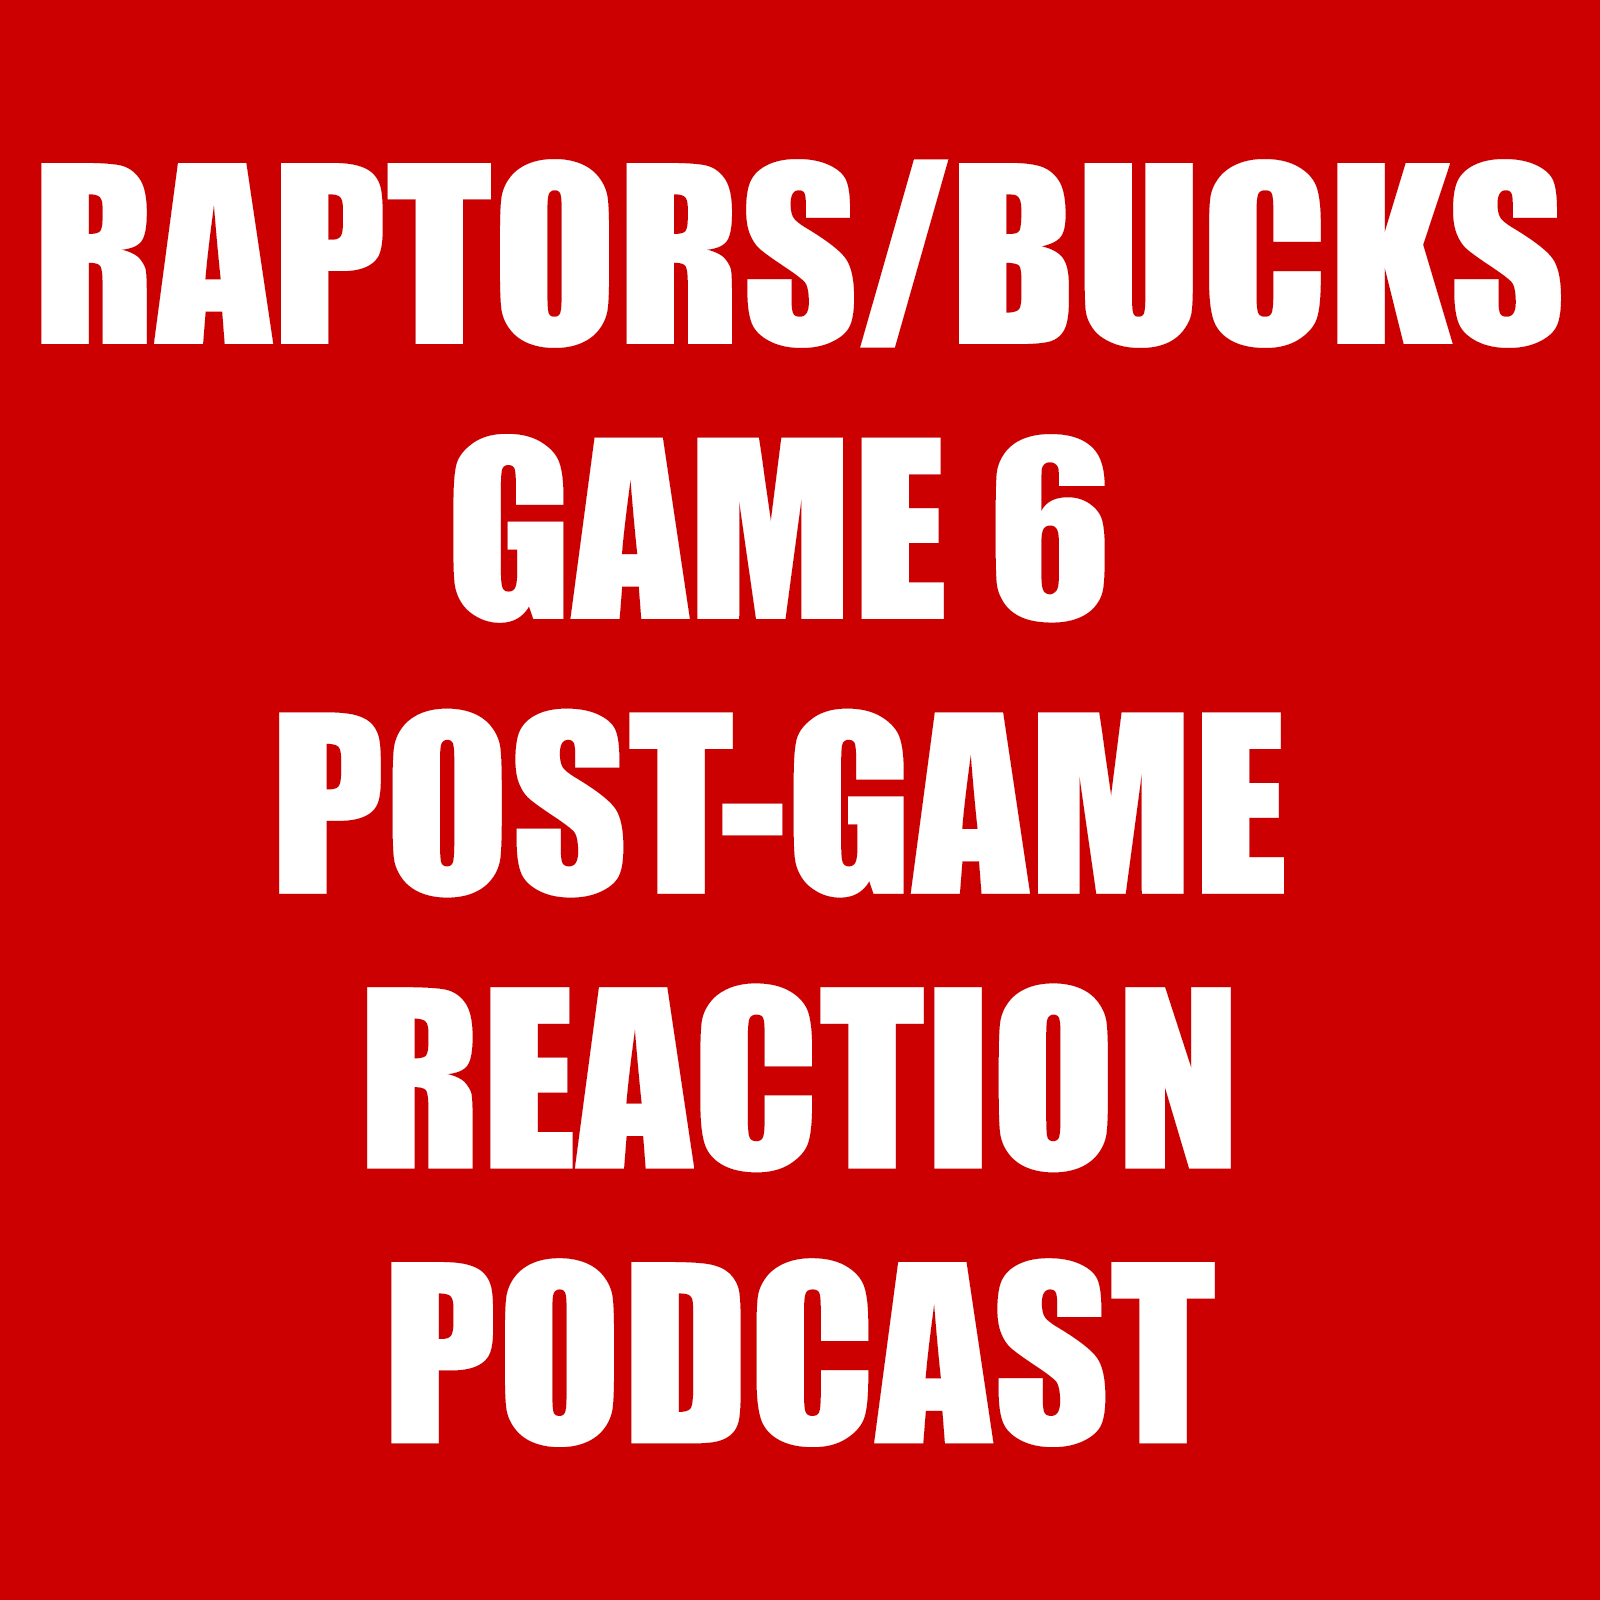 Raptors-Bucks Game 6 Reaction Podcast – Win at all costs